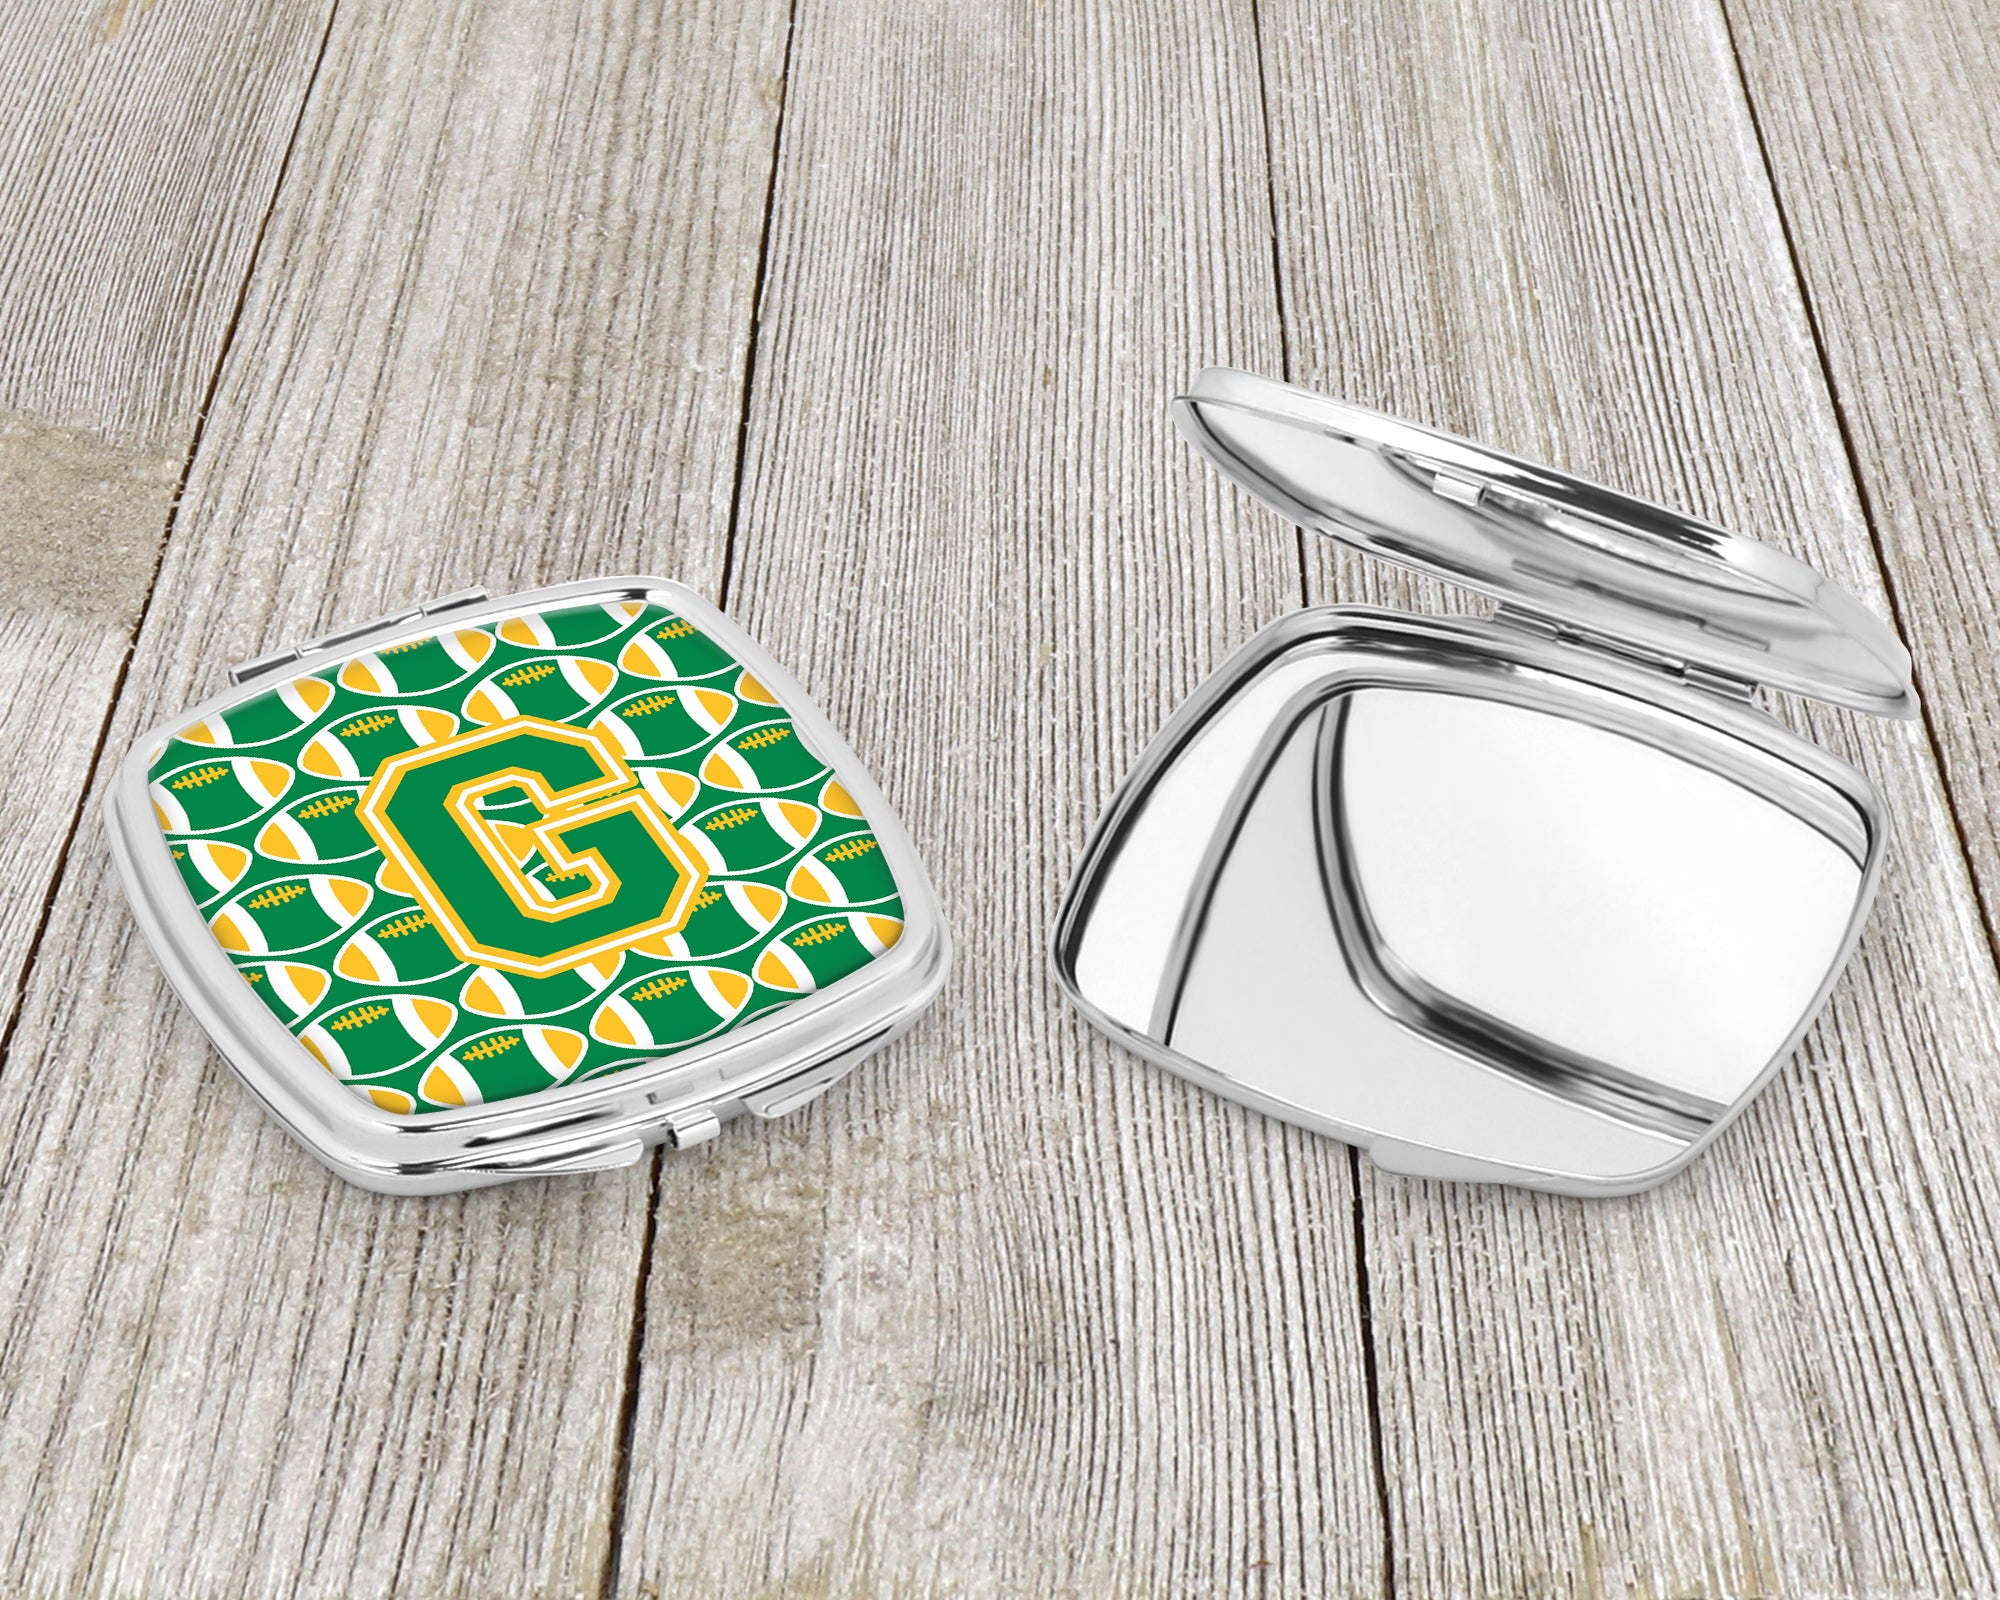 Letter G Football Green and Gold Compact Mirror CJ1069-GSCM  the-store.com.